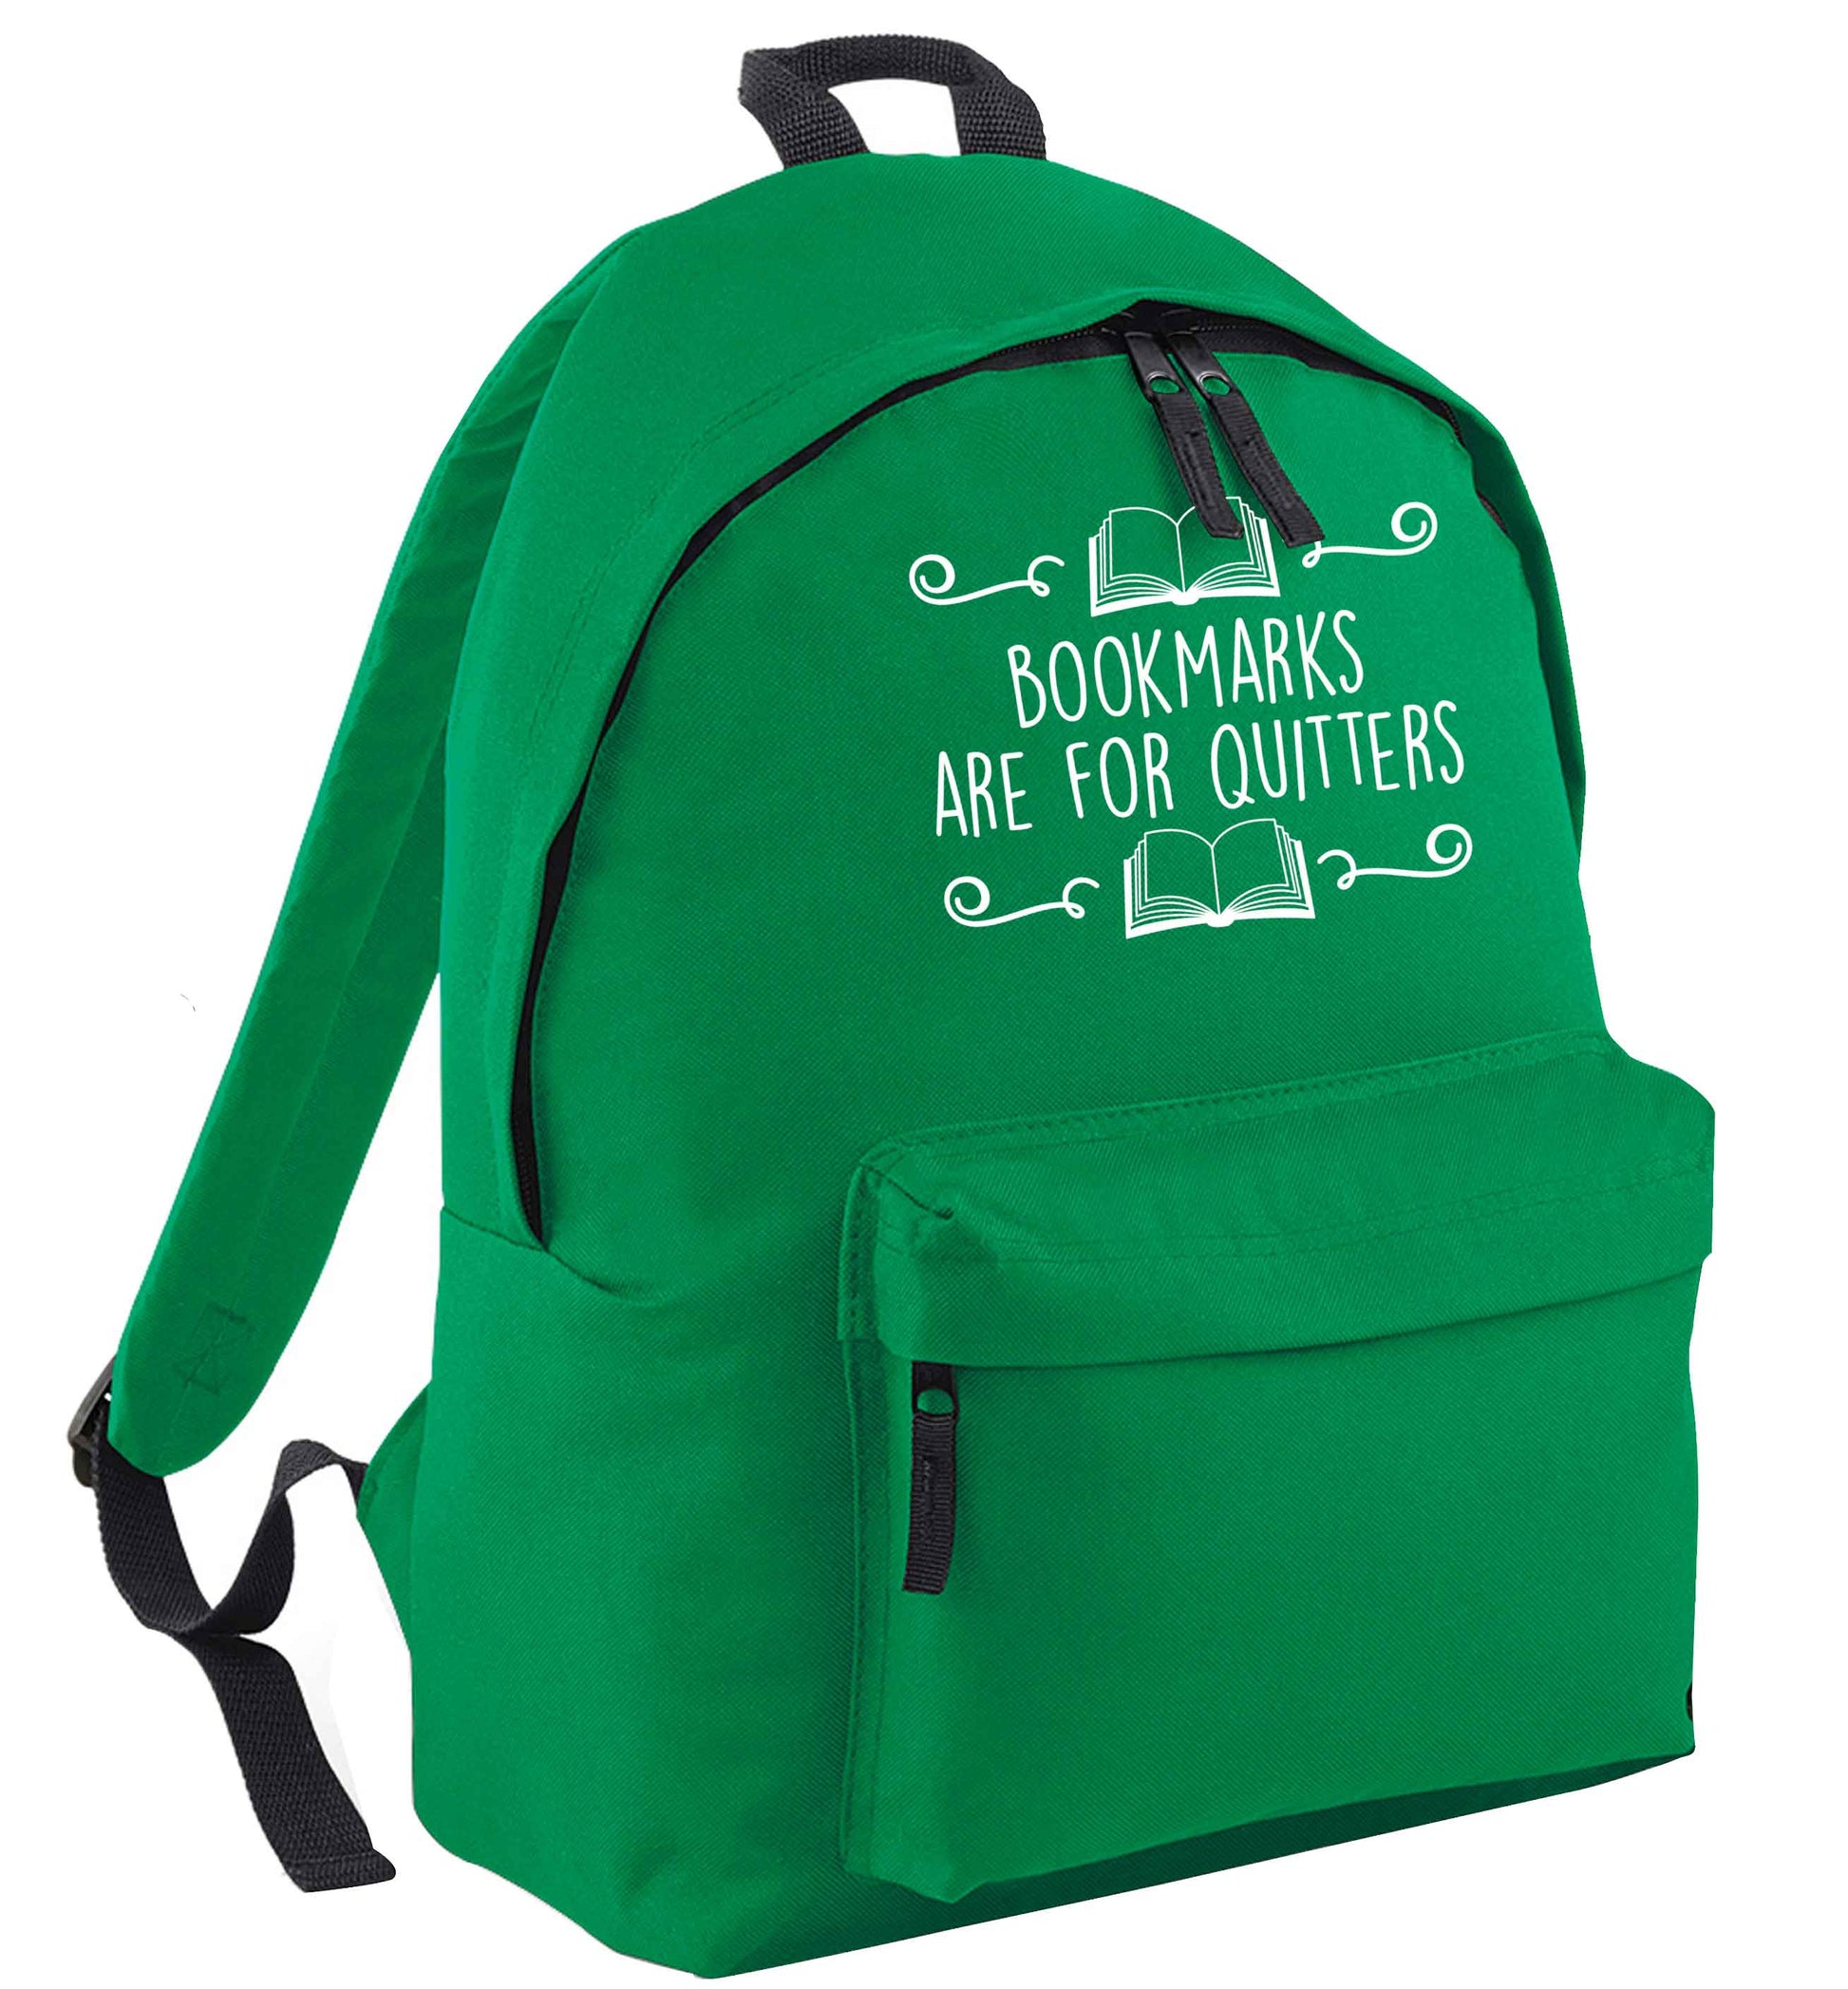 Bookmarks are for quitters green adults backpack